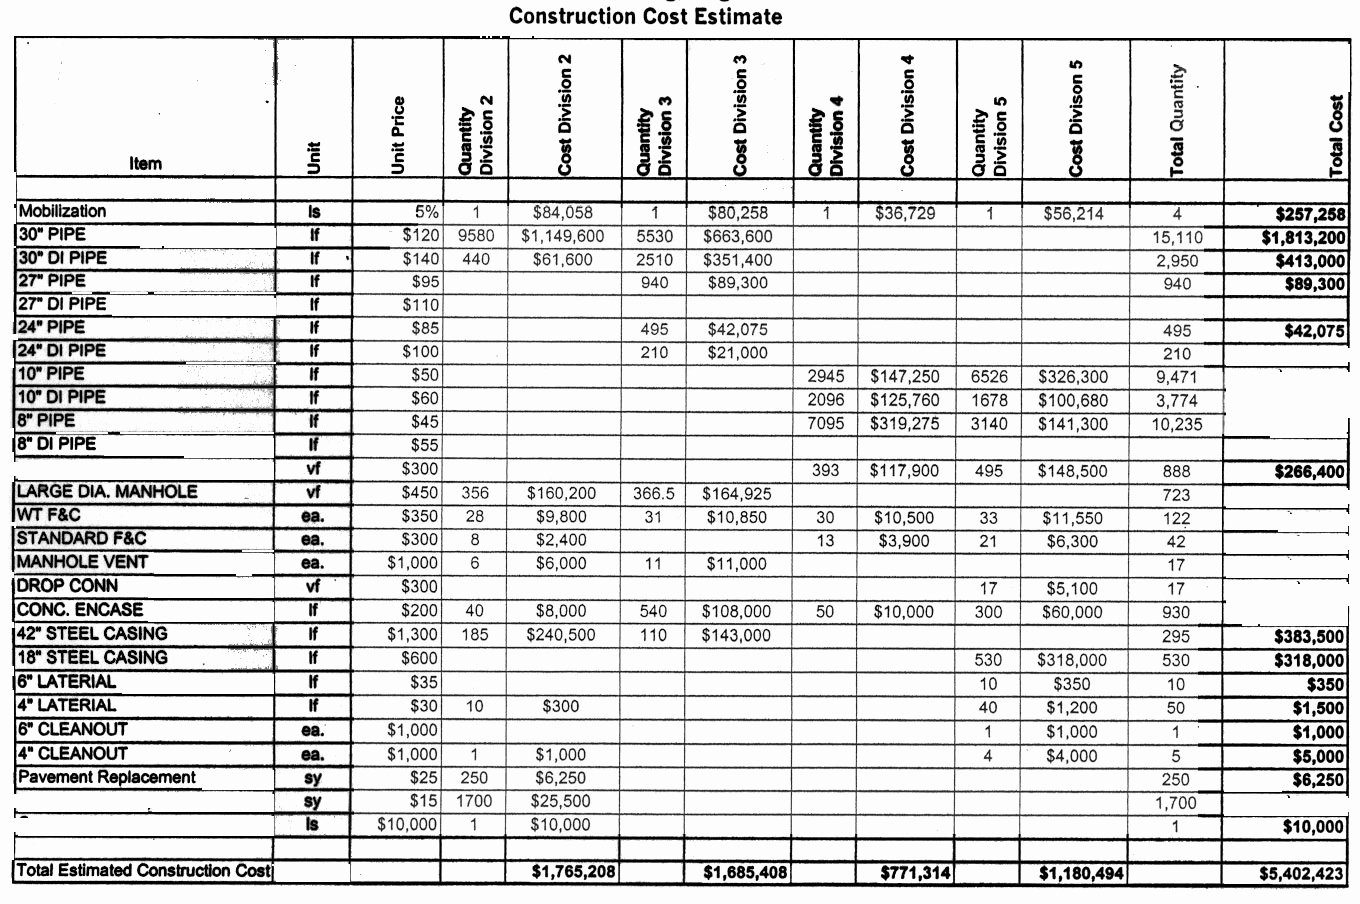 Construction Estimating Spreadsheet Template New Estimate Spreadsheet Template Spreadsheet Templates for